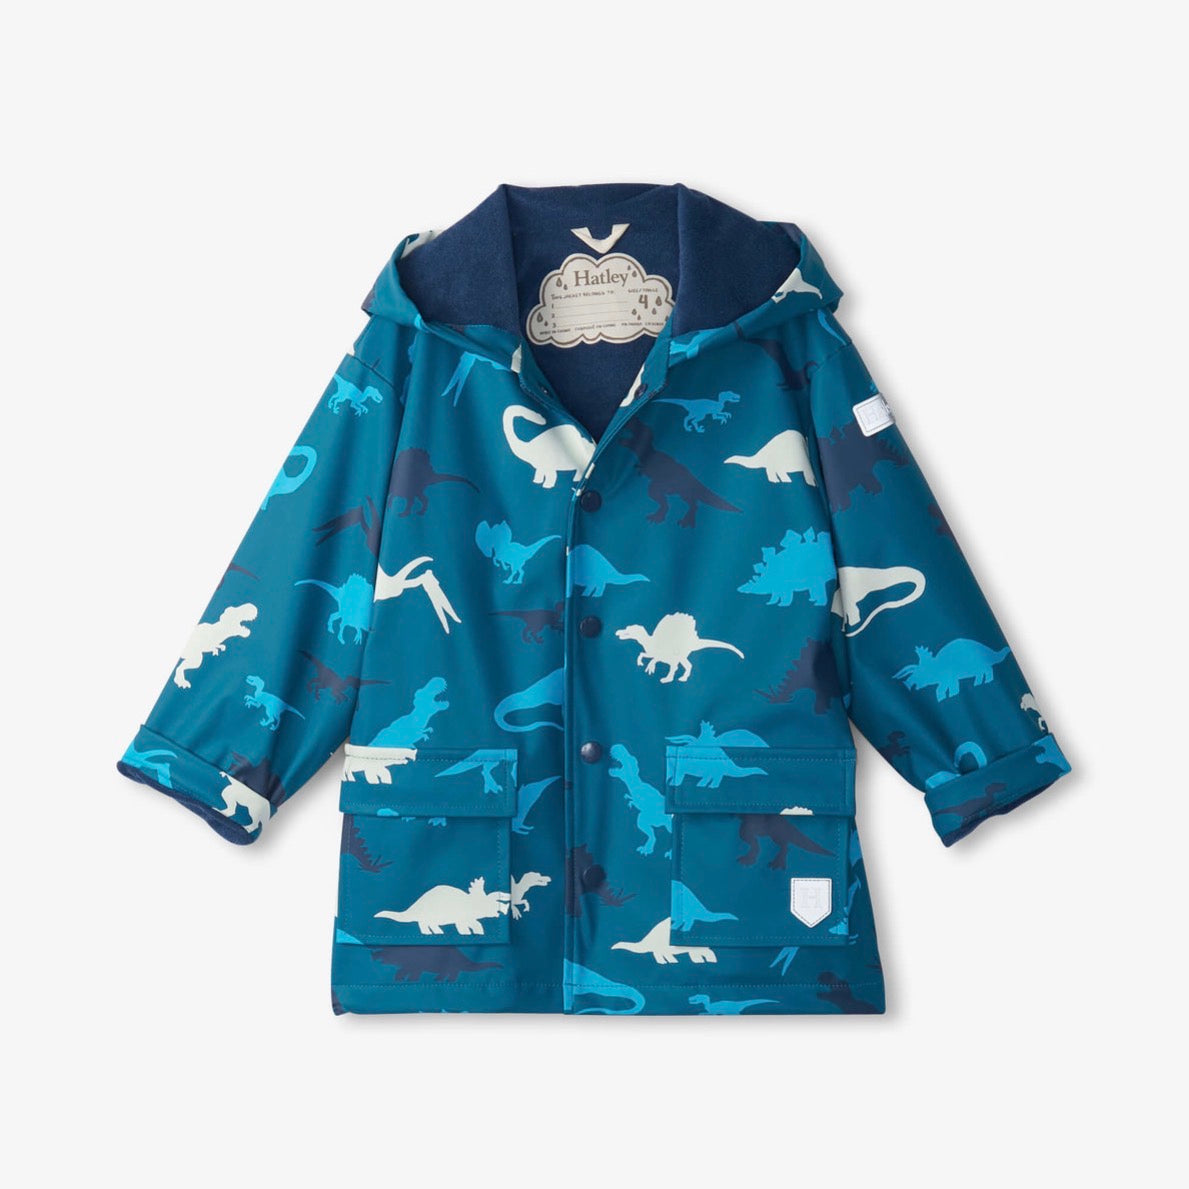 Hatley Real Dinos Colour Changing Raincoat F23dsk1336 Clothing 2YRS / Blue,3YRS / Blue,4YRS / Blue,5YRS / Blue,6YRS / Blue,7YRS / Blue,8YRS / Blue